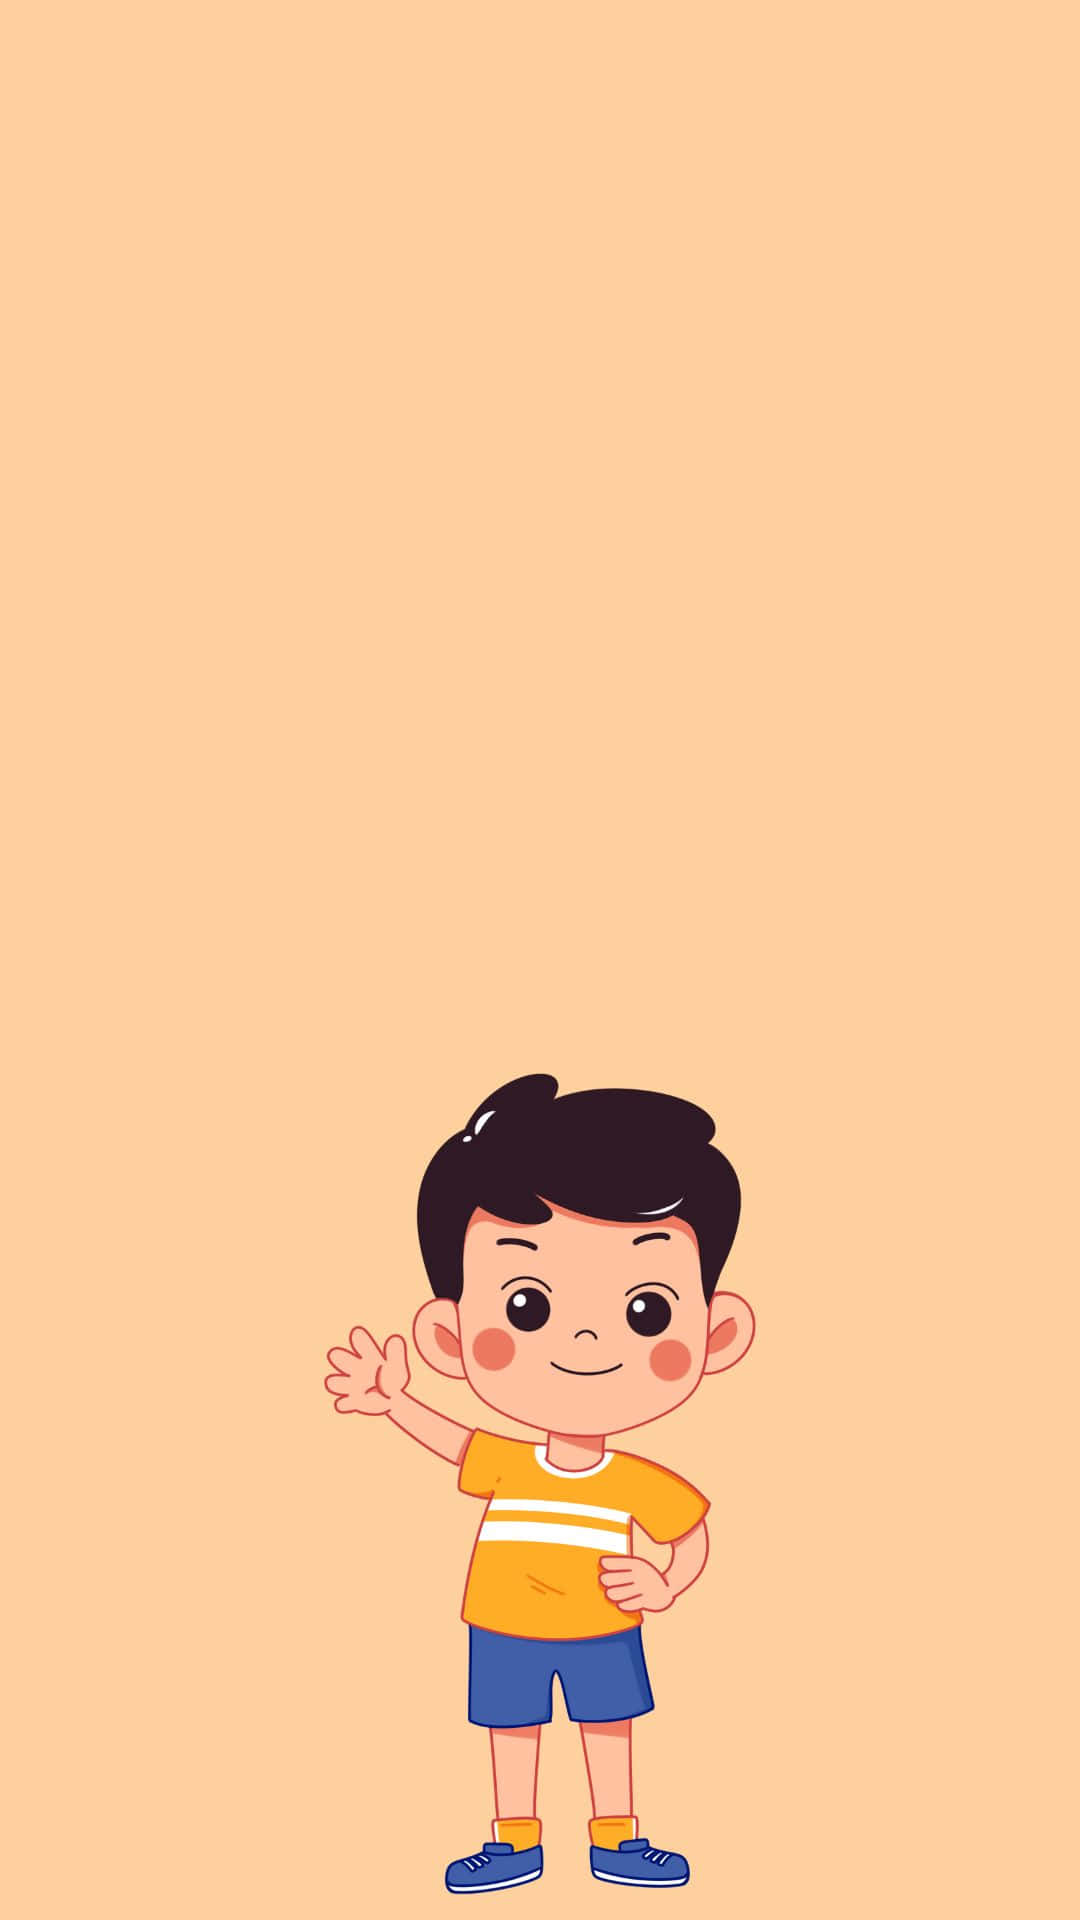 Handsome Boy Cartoon In Yellow And Blue Background